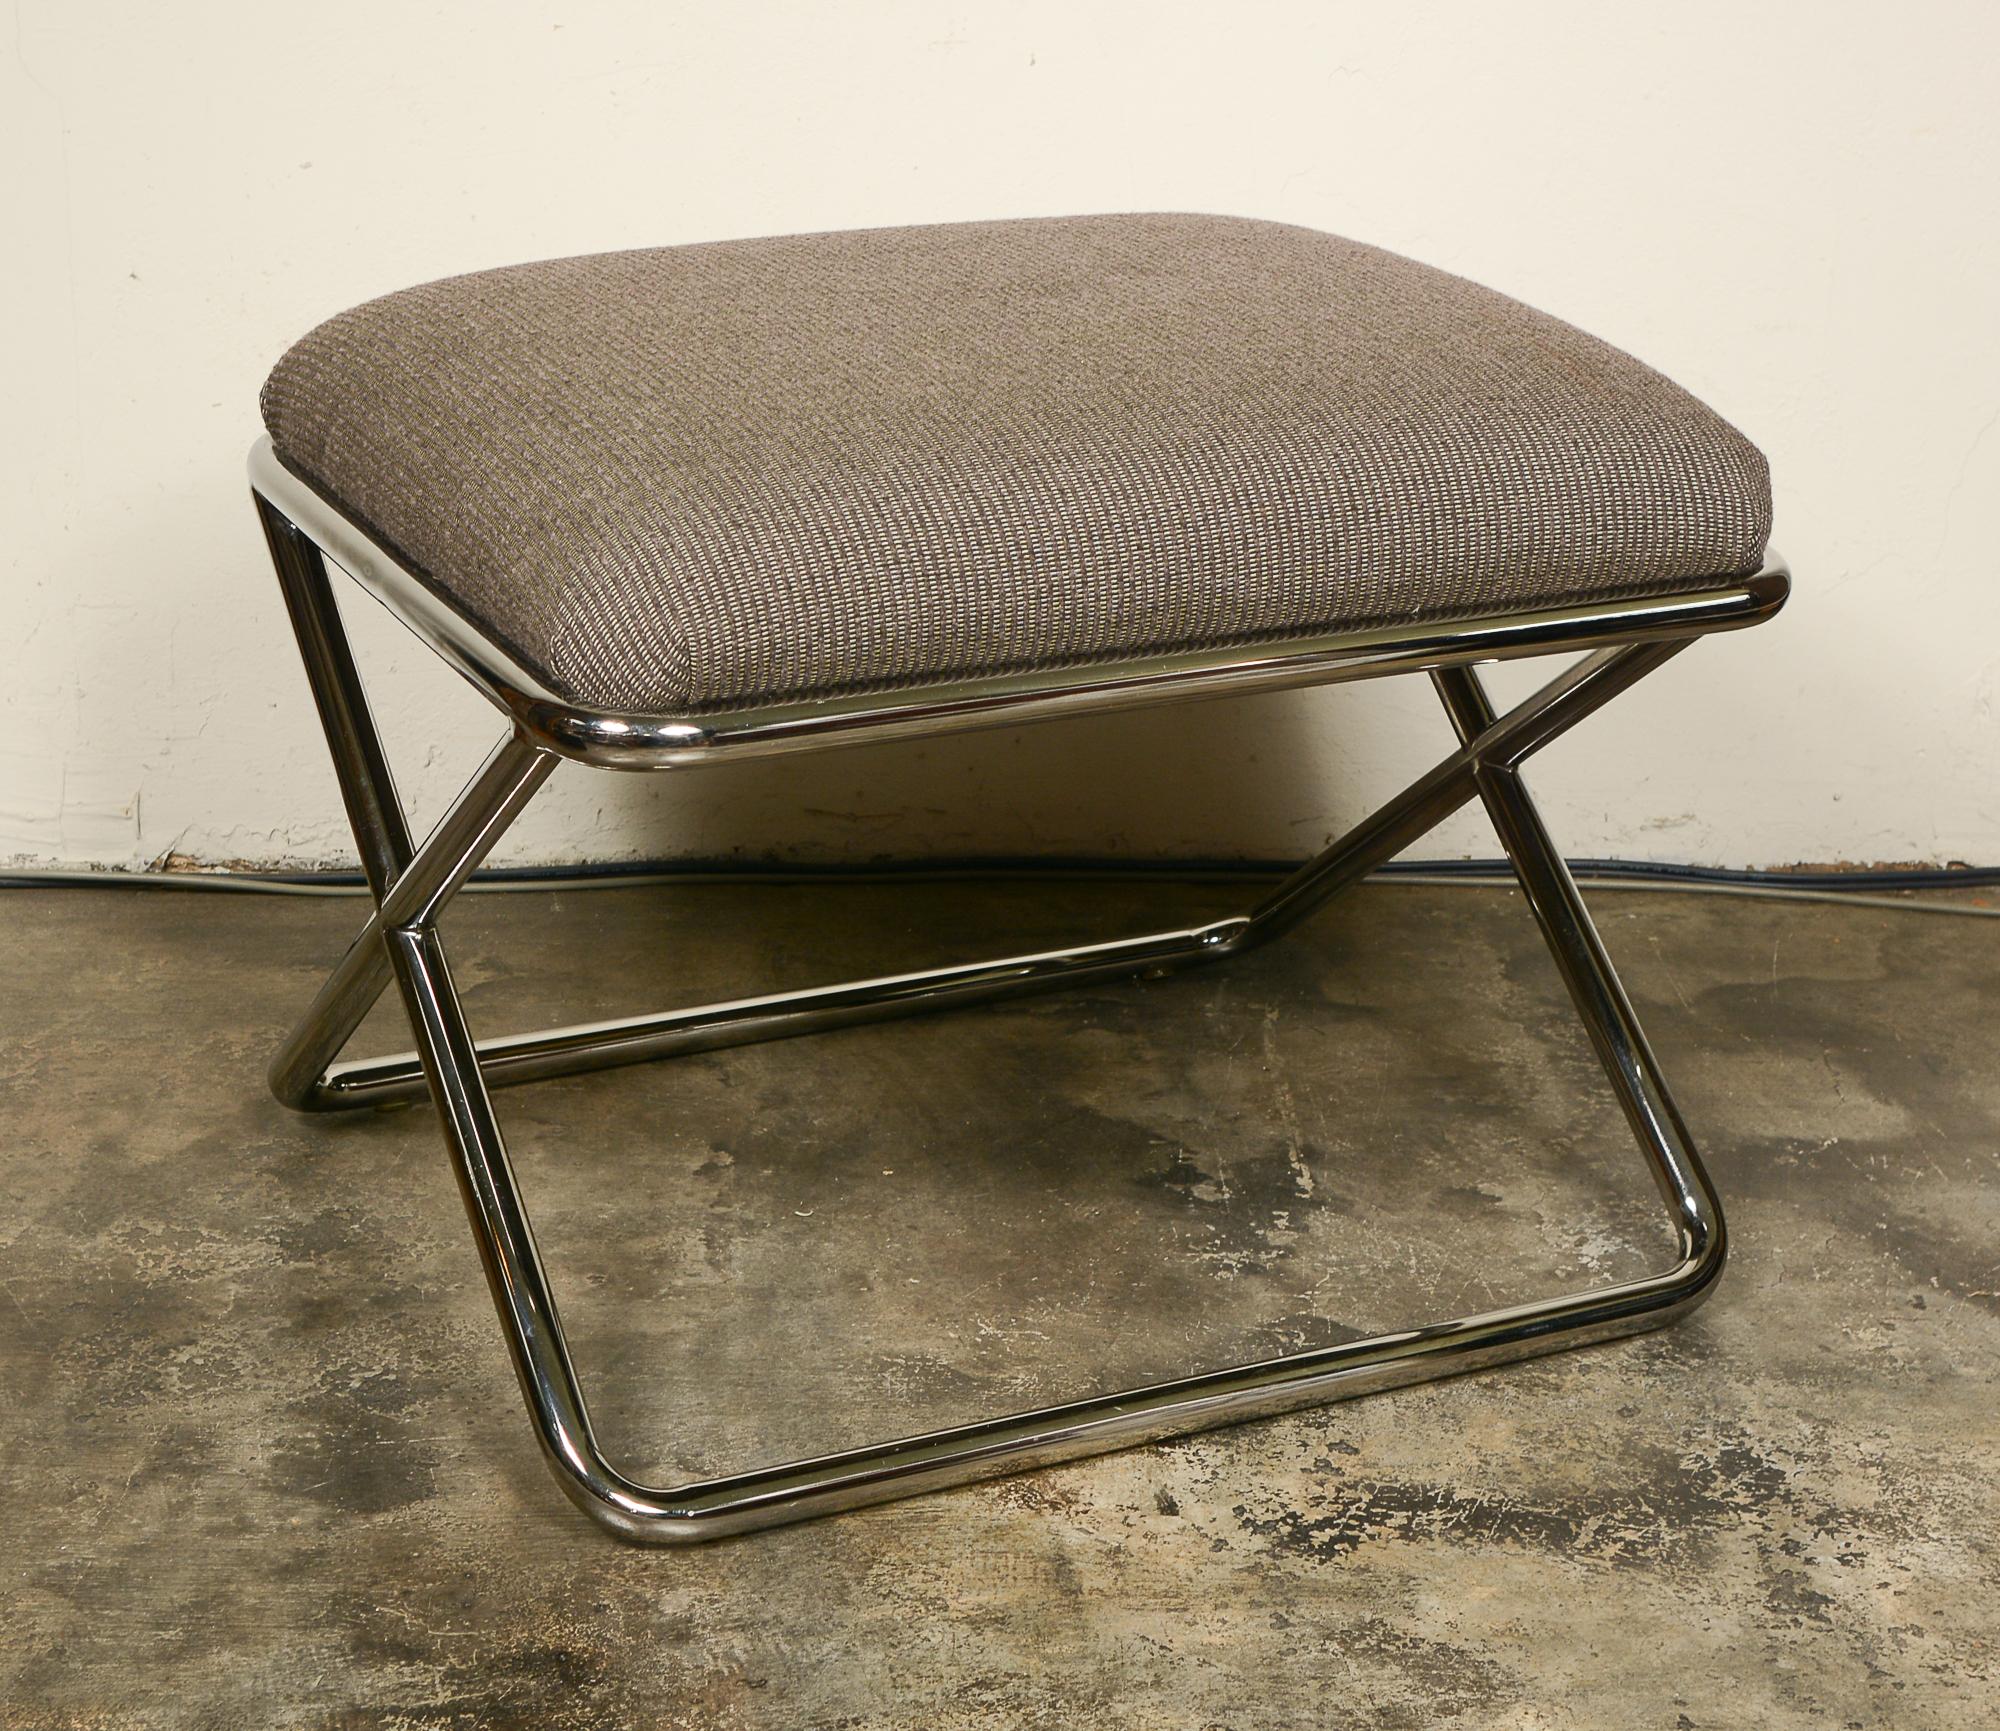 Ottoman or stool made by Swaim Originals of High Point, N.C. This was likely designed by John Mascheroni. This has a chrome plated X base. The construction of the stool is very high quality. The stool retains a Swaim Originals label. The upholstery